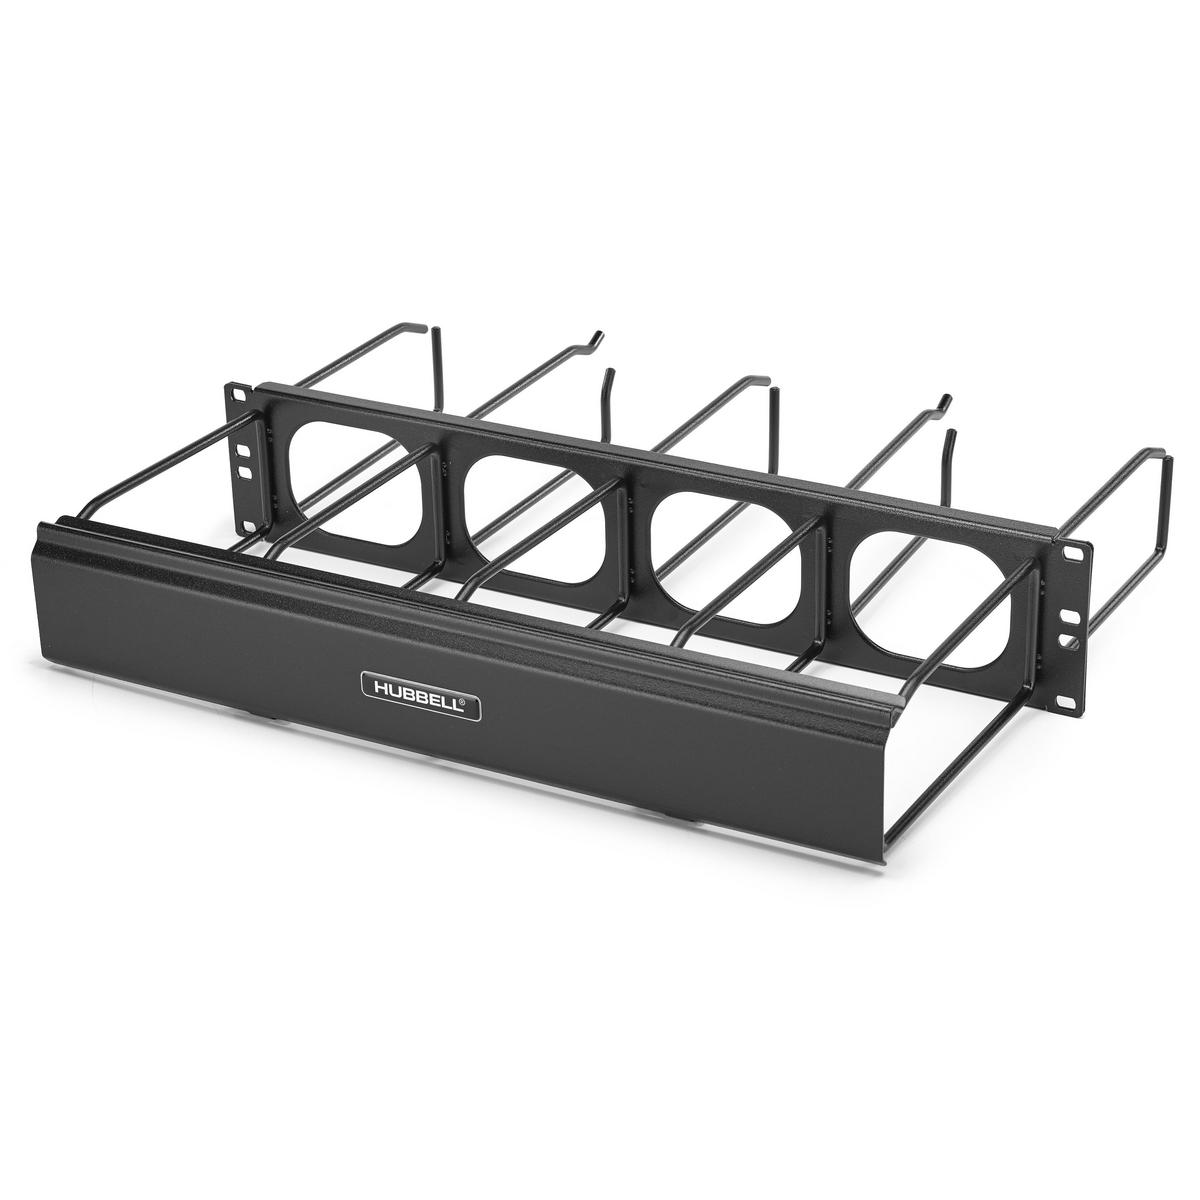 Hubbell HM144C Hubbell Premise Wiring Products, Horizontal Cable Management, M-Series, 1-Unit, 4" Front Extension, 4" Rear Extension, With Cover, Black  ; Double Sided